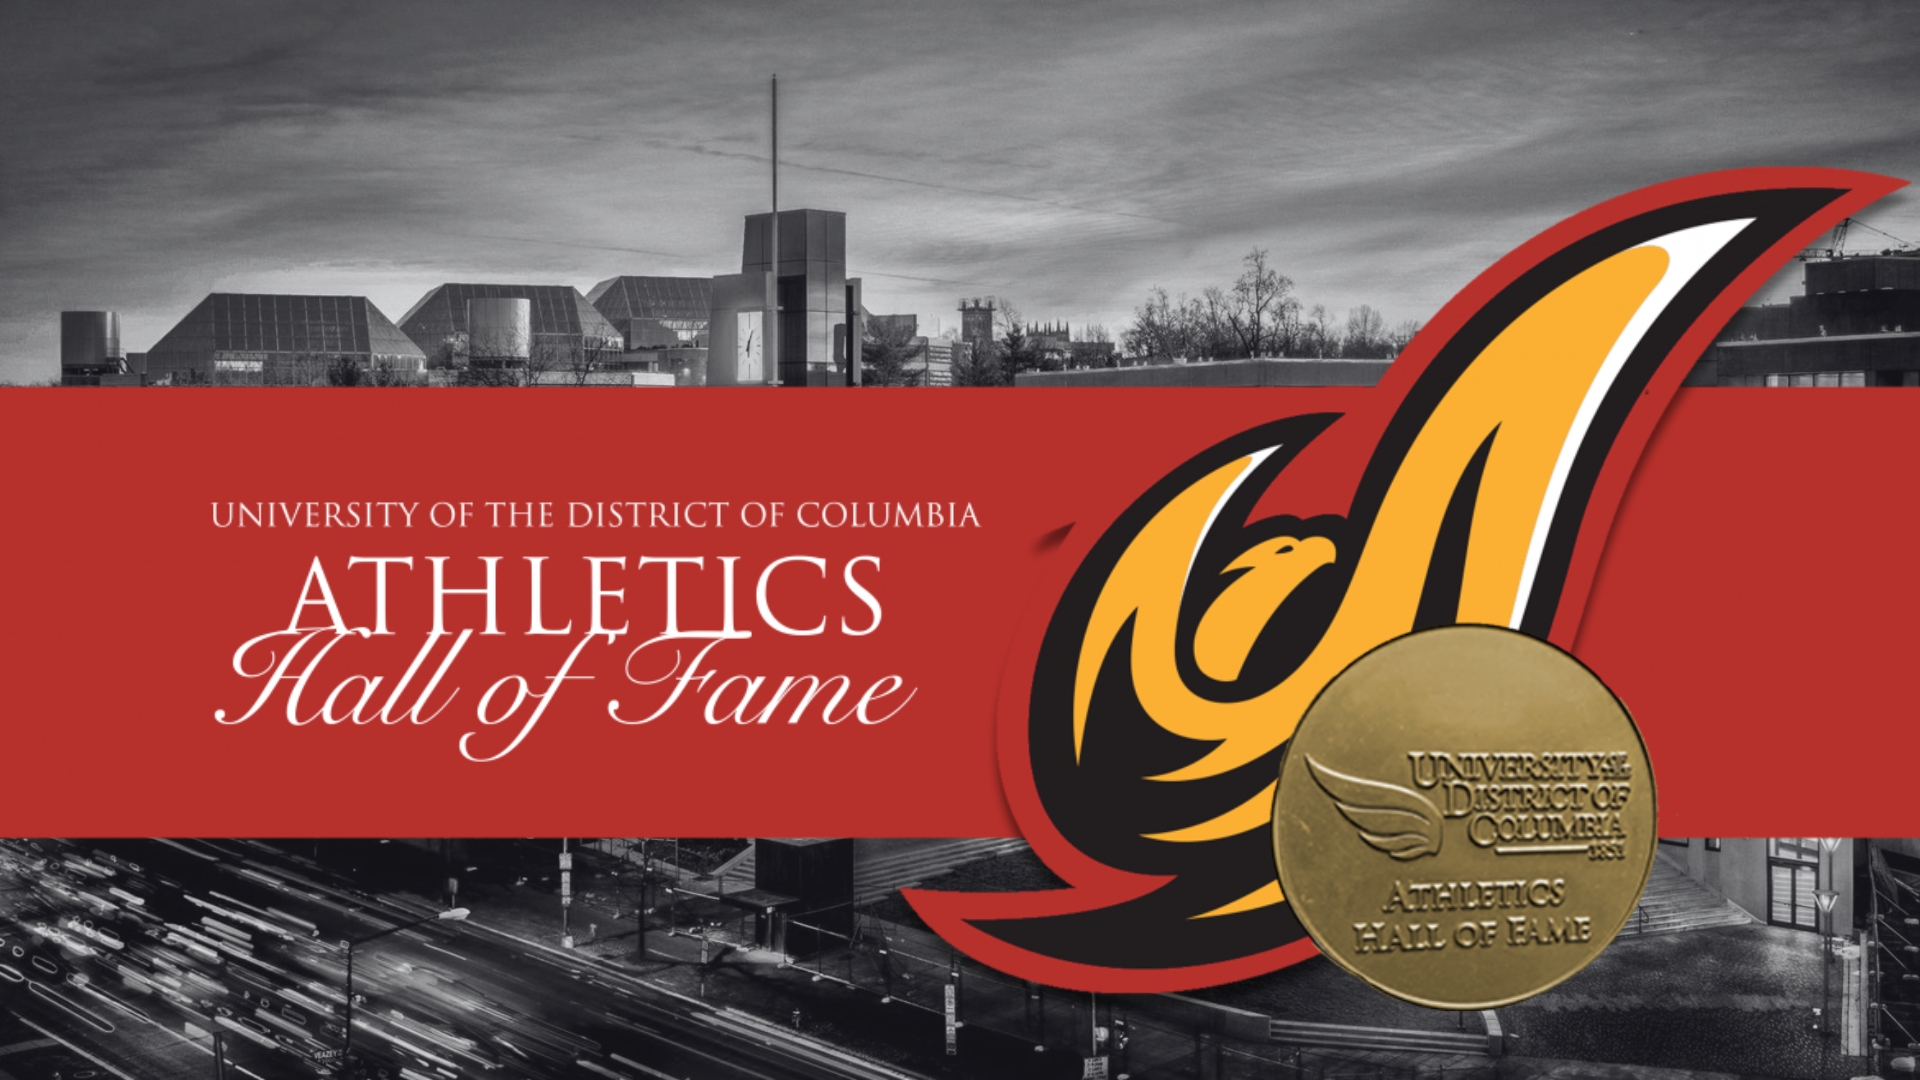 The University of the District of Columbia Announces its 10th Hall of Fame Induction Class